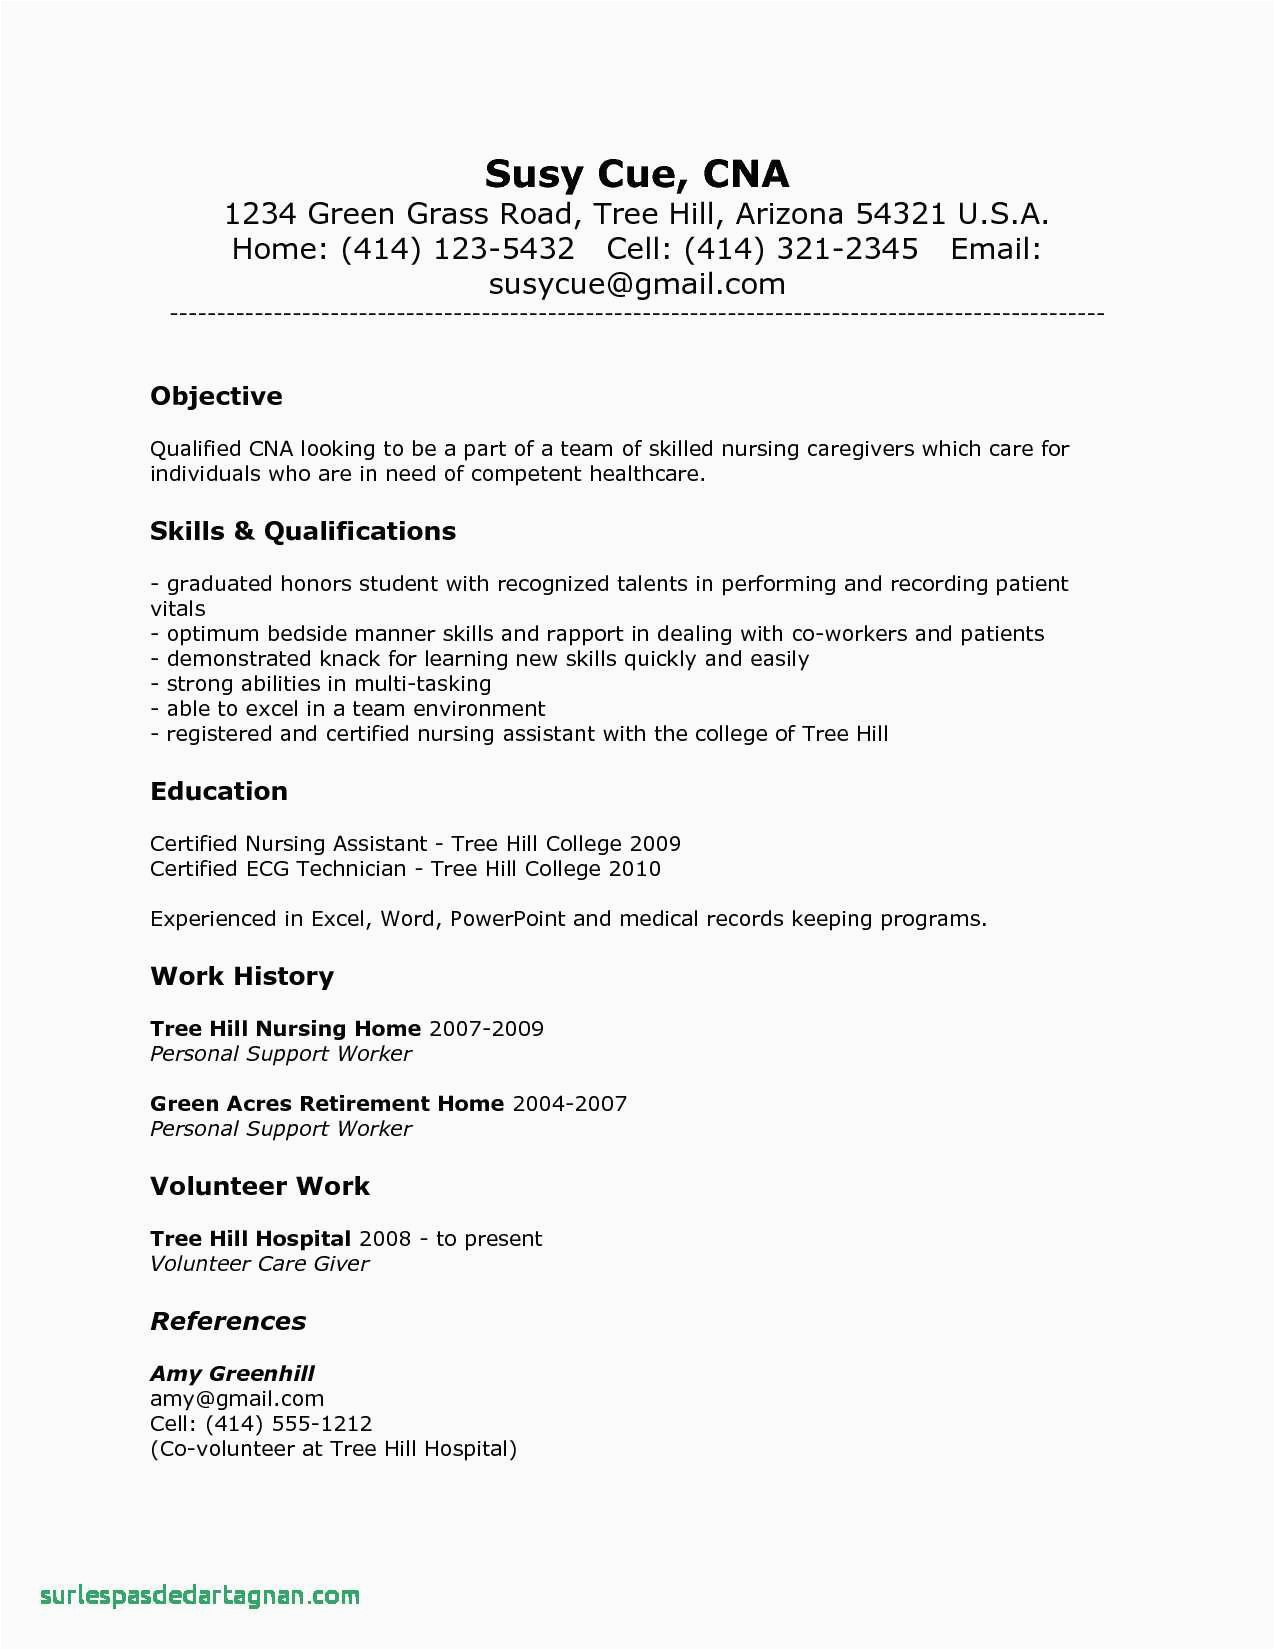 Resume Sample for Sales Lady without Experience 78 New S Sample Resume for Registered Nurse